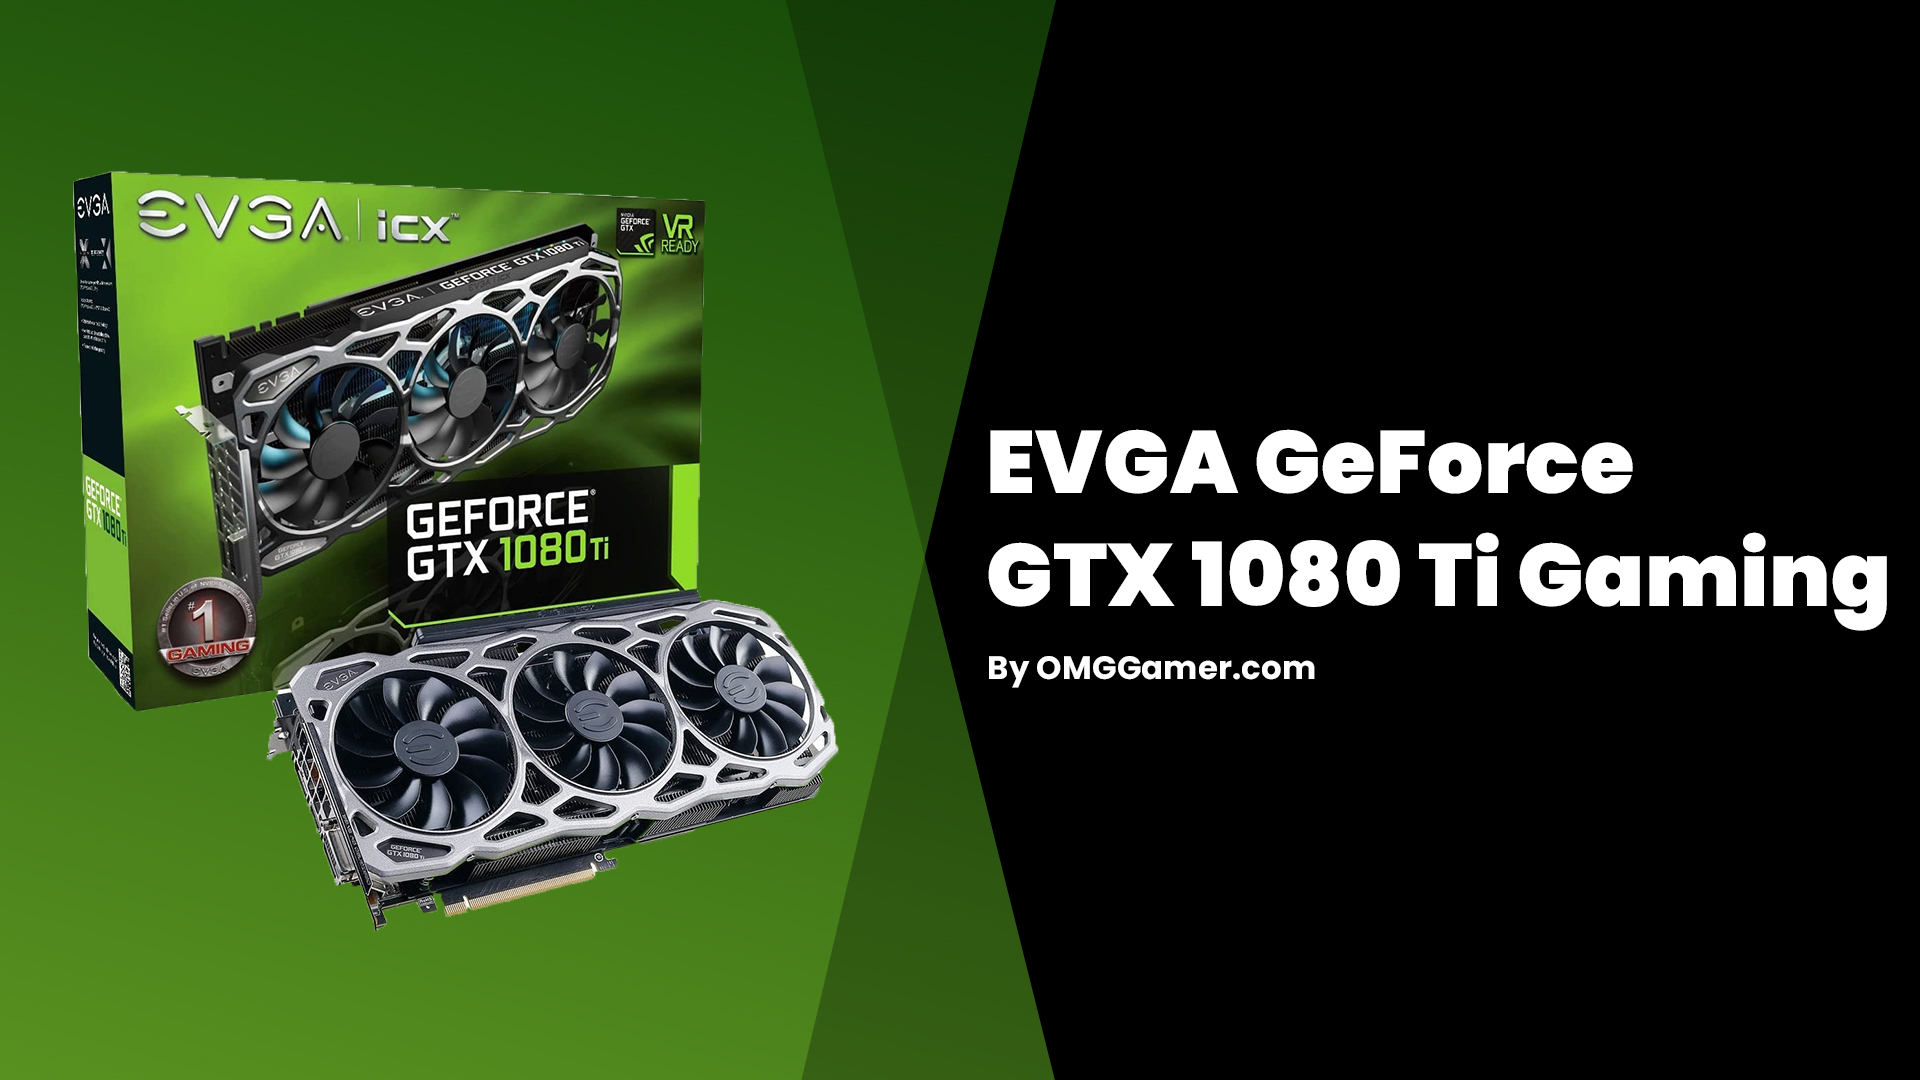 EVGA GeForce GTX 1080 Ti Gaming: Cheapest 4K Graphics Cards